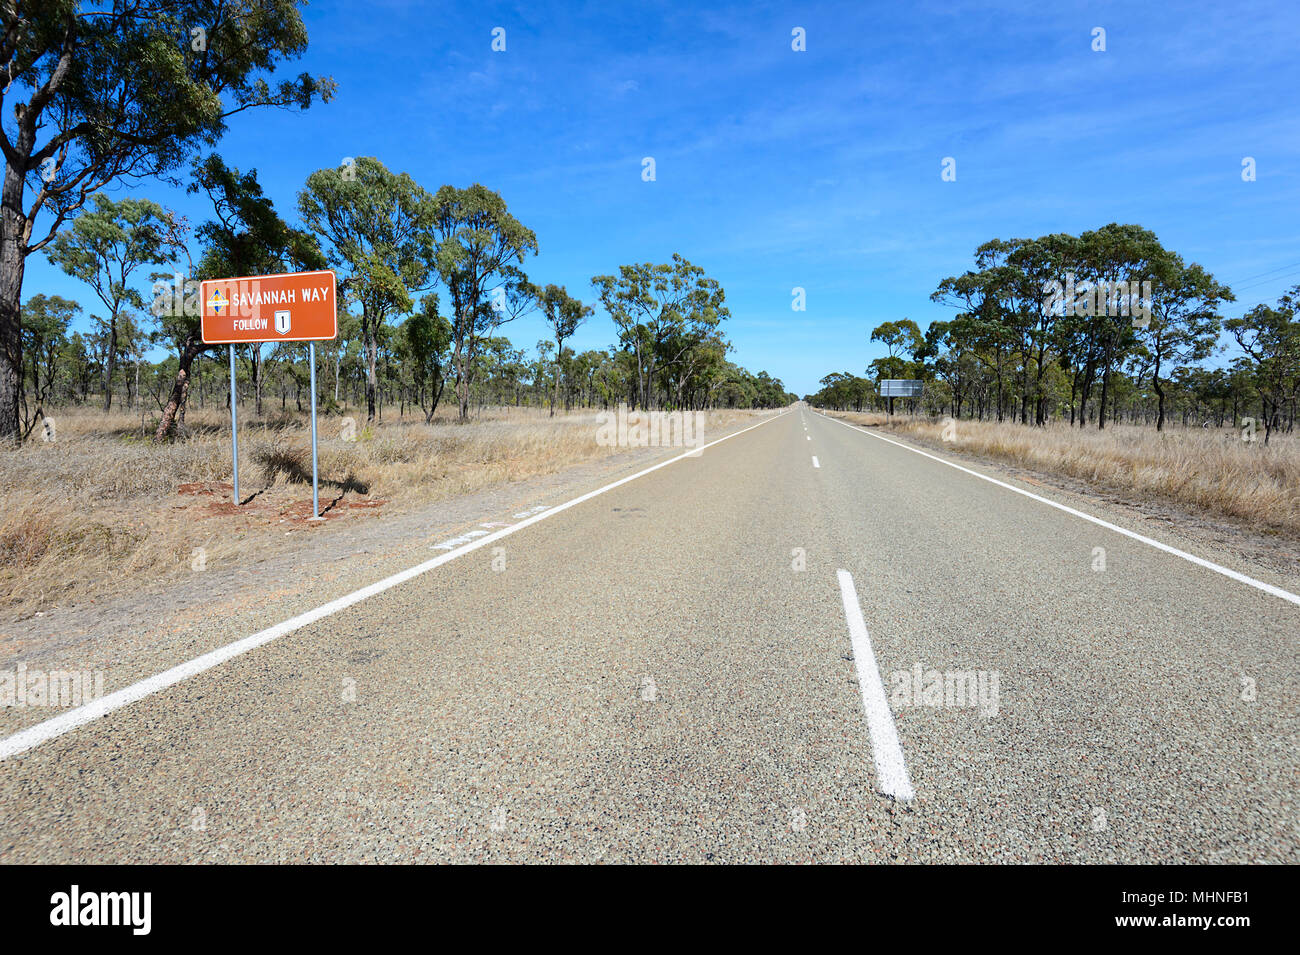 Savannah Way is a sealed road through remote and isolated Queensland, QLD, Australia Stock Photo